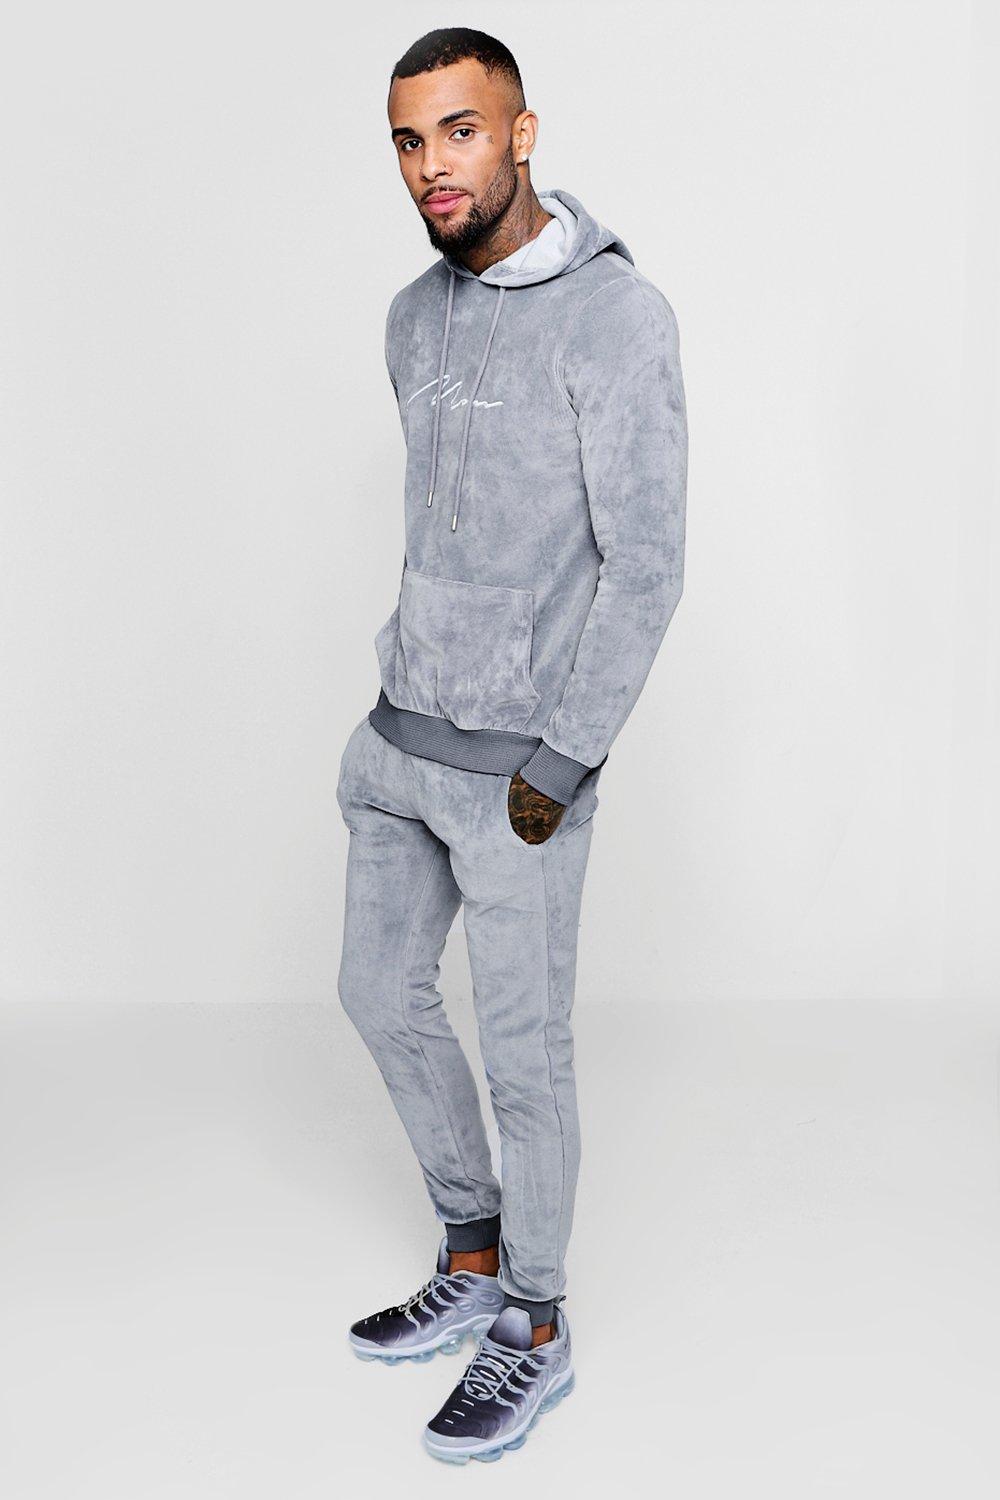 velour tracksuit mens big and tall